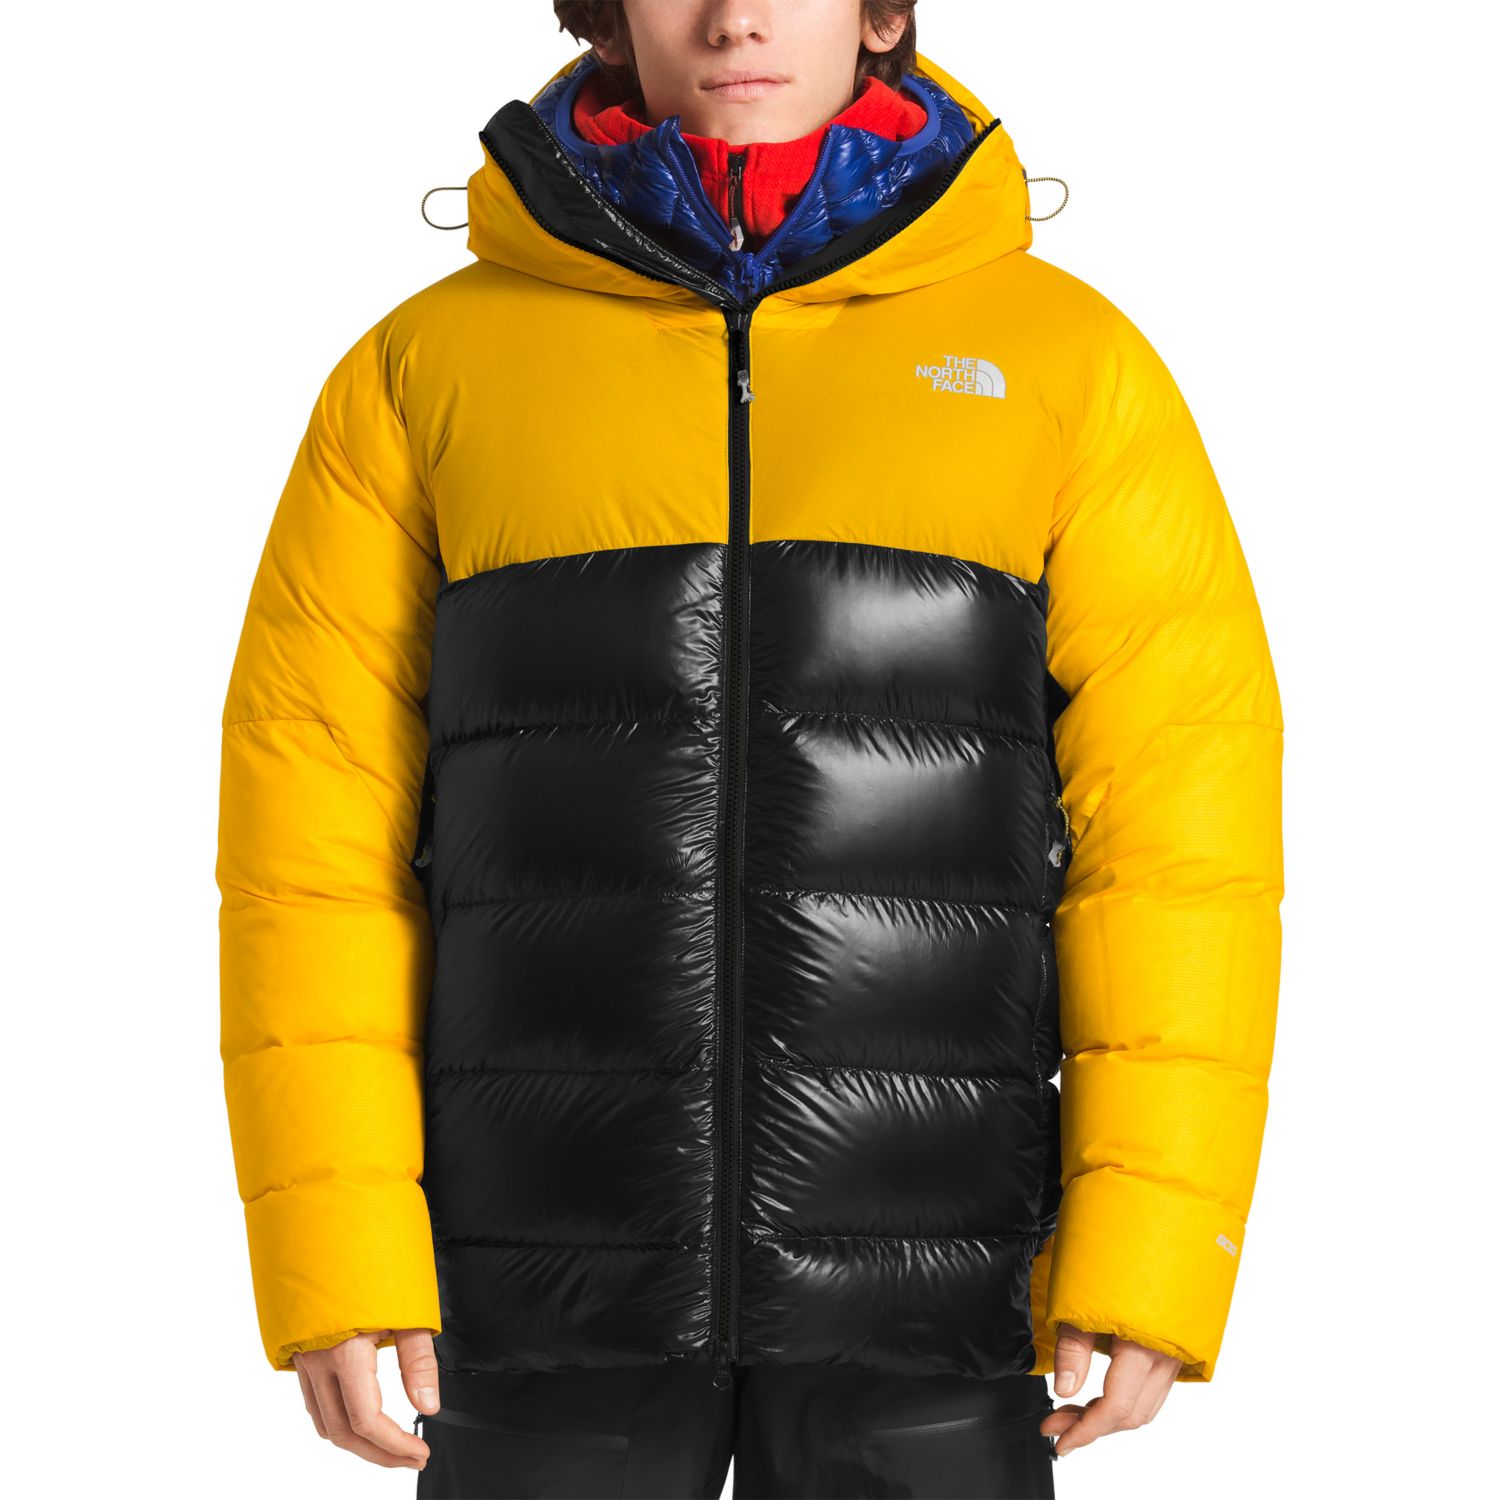 north face 600 series